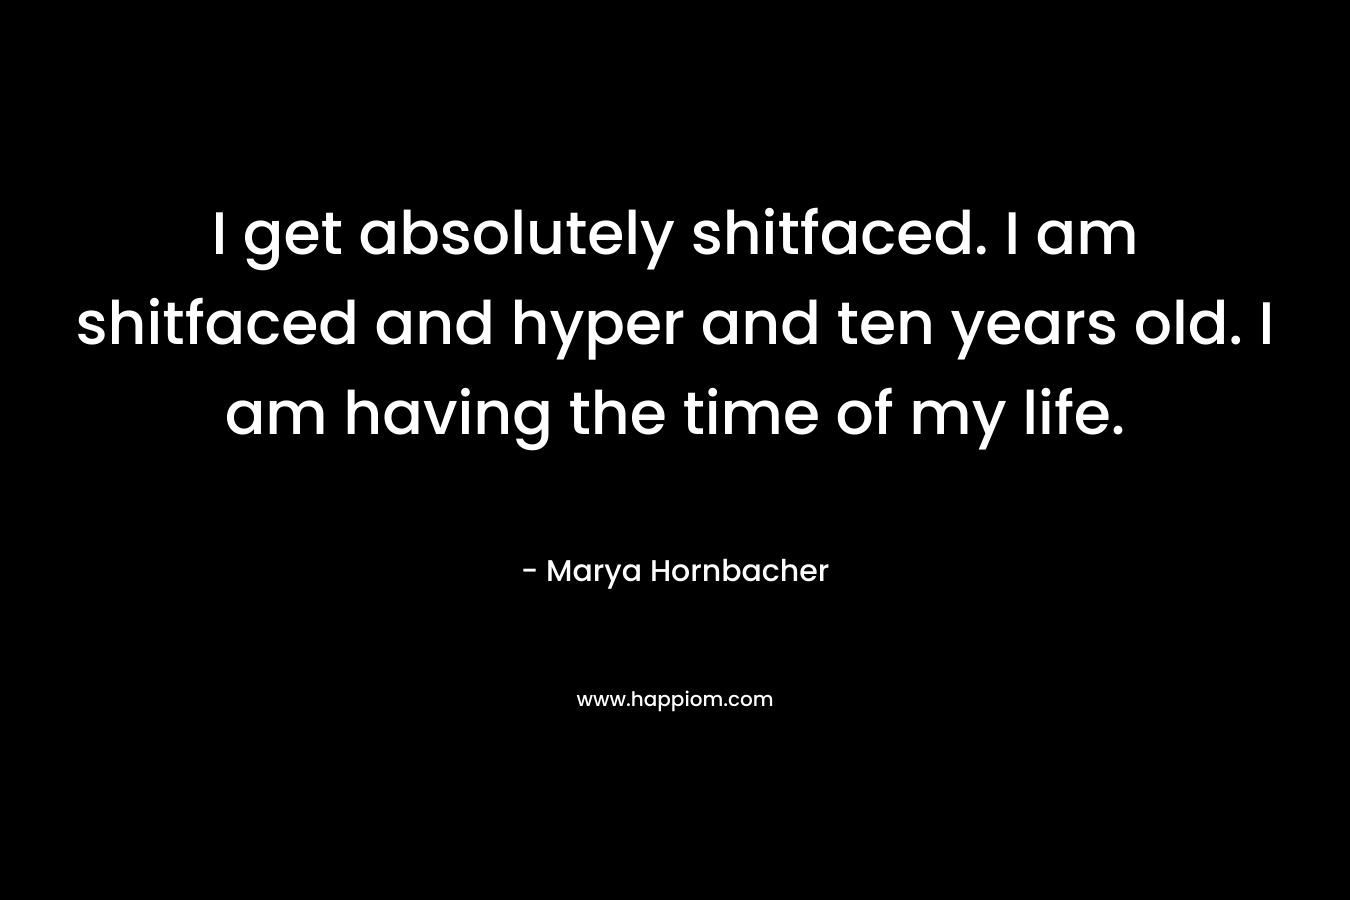 I get absolutely shitfaced. I am shitfaced and hyper and ten years old. I am having the time of my life. – Marya Hornbacher